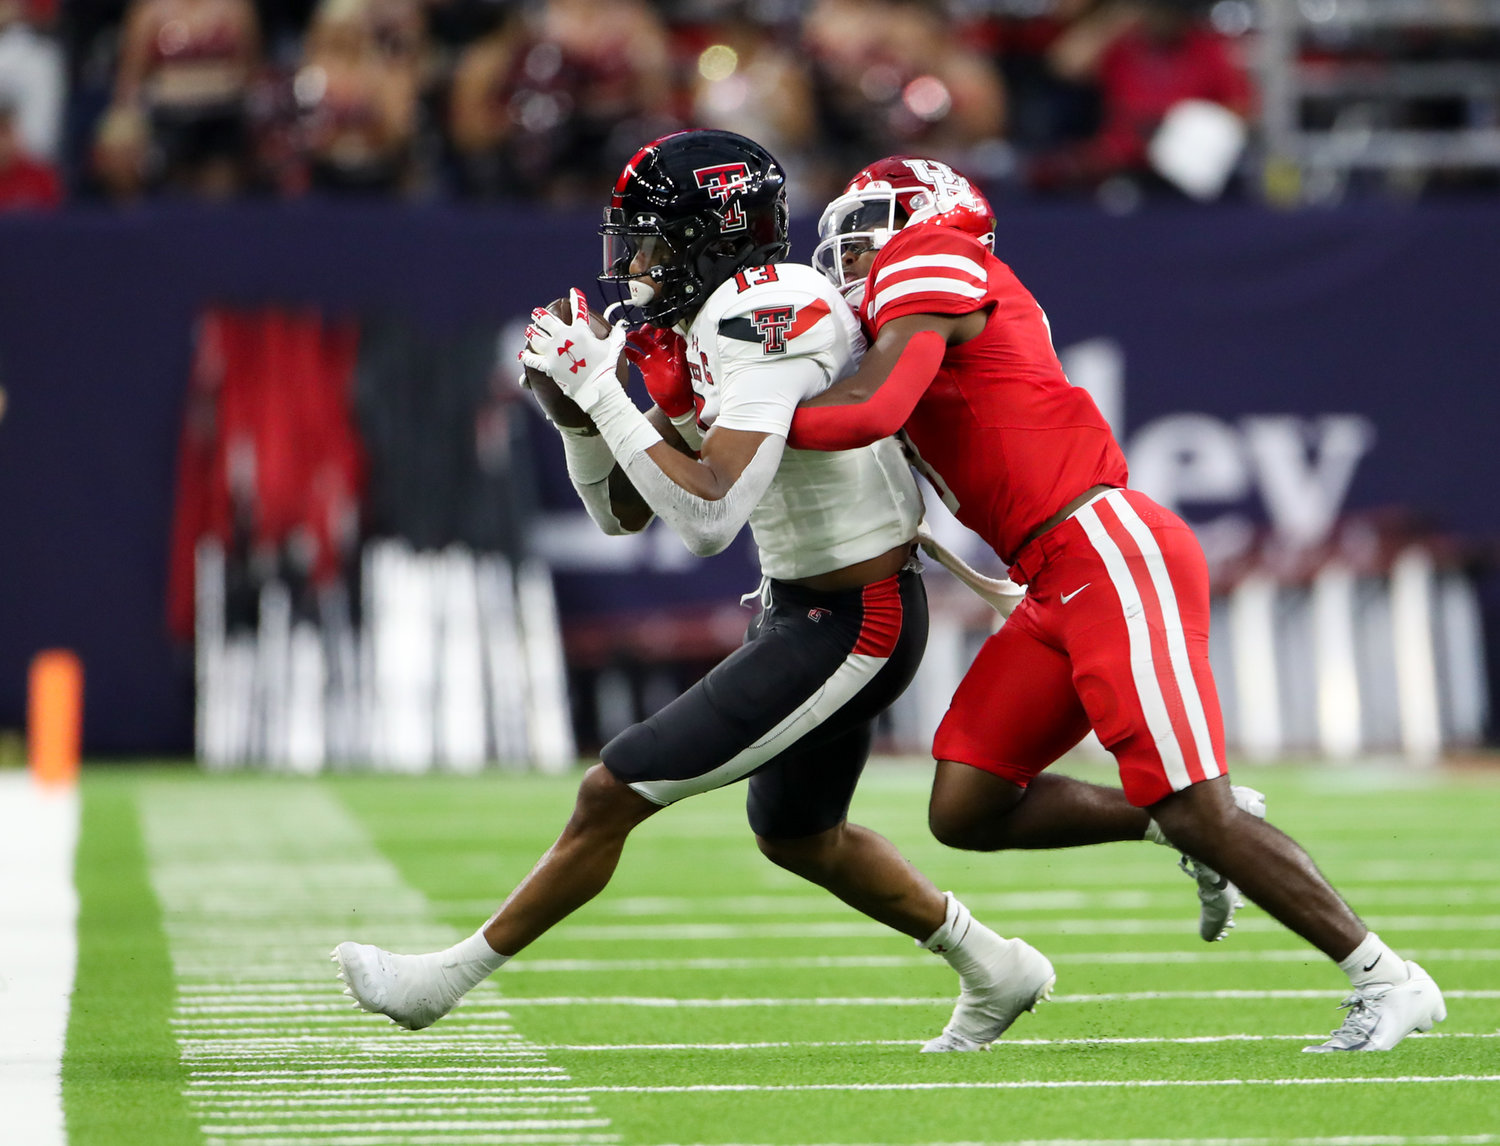 Houston Cougars cornerback Marcus Jones (8) pushes Texas Tech Red Raiders wide receiver Erik Ezukanma (13) out of bounds after a reception during an NCAA football game between Houston and Texas Tech on September 4, 2021 in Houston, Texas.